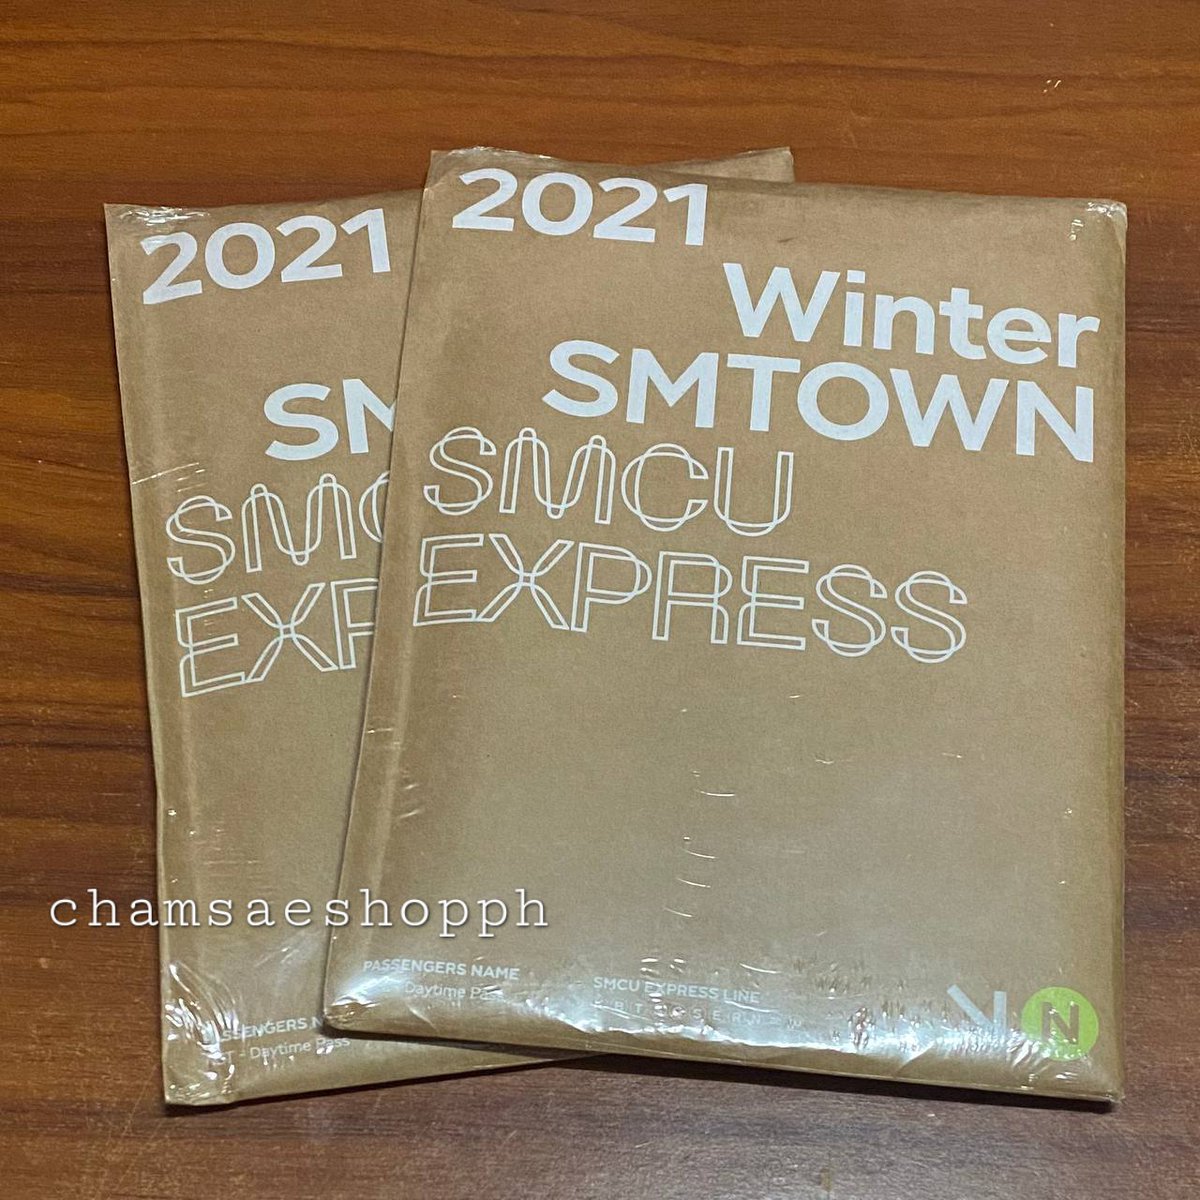 wts lfb ph go

nct daytime pass smcu express 

₱ 580
 
- sealed
- onhand and ready to ship
- mop: gcash bpi 
- mod: sdd sco ggx

🛒 dm to order! 

t. 2021 smtown